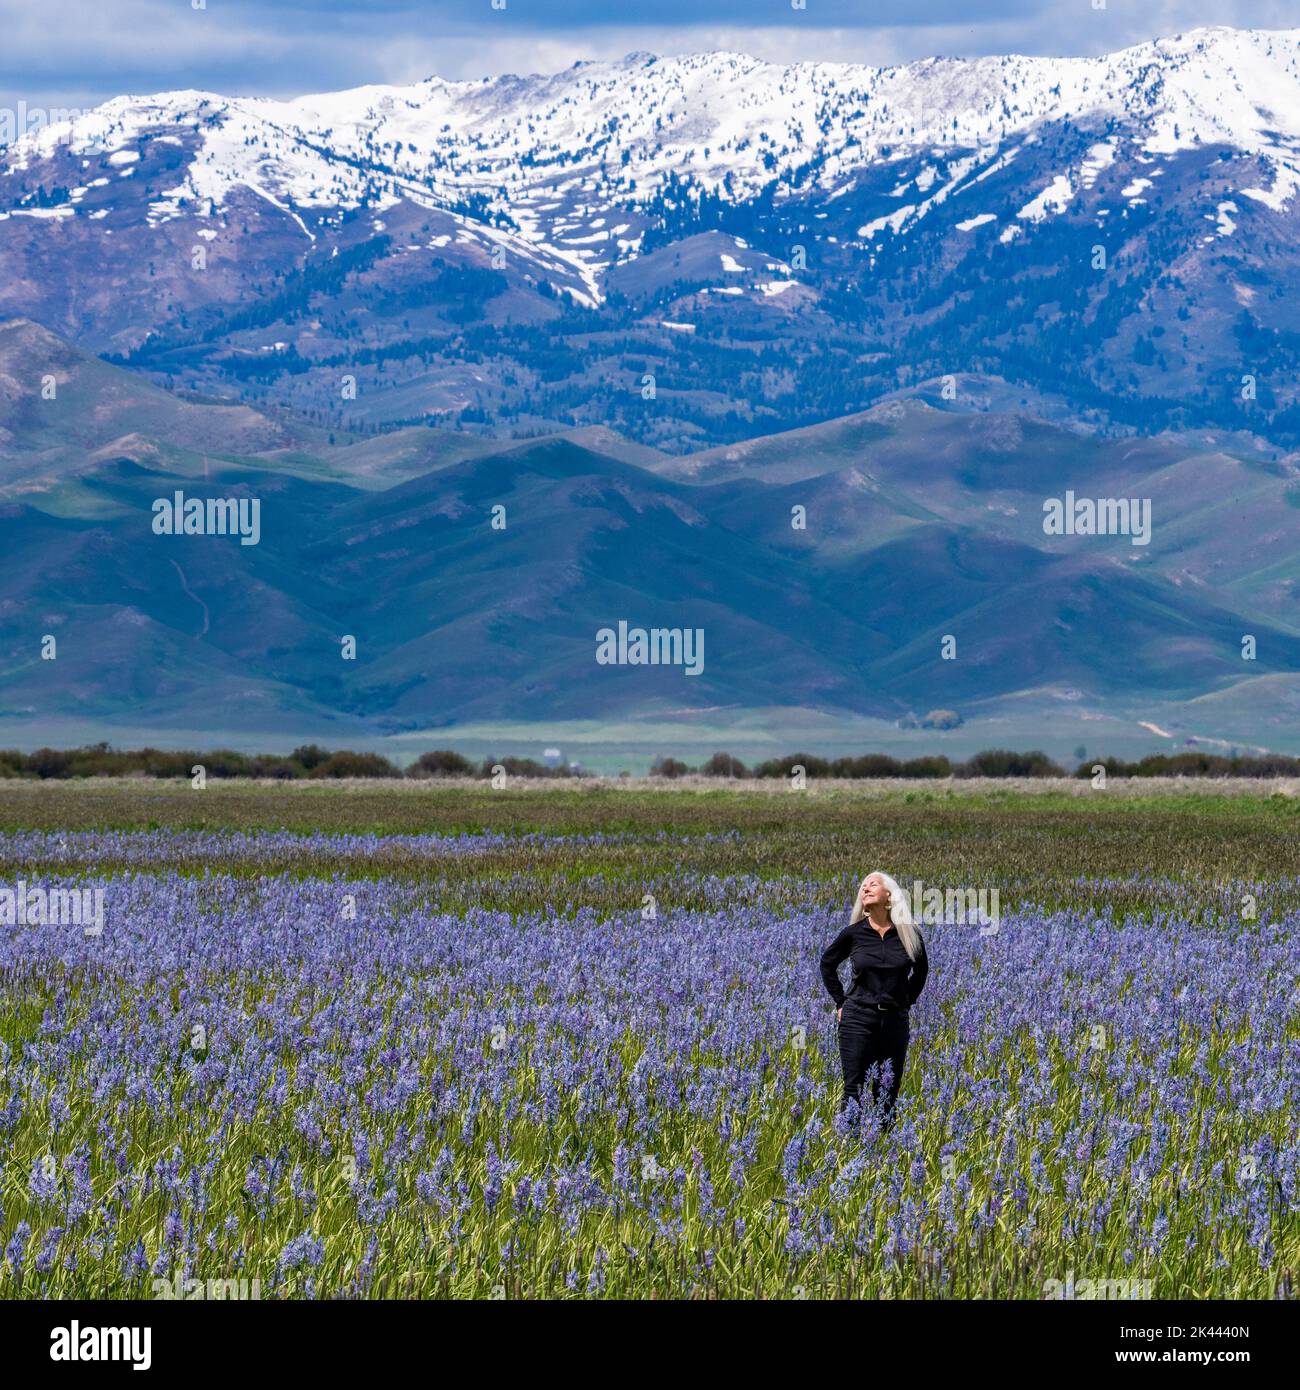 Usa, Idaho, Fairfield, Woman standing in field of blooming camas lilies with Soldier Mountain in background Stock Photo